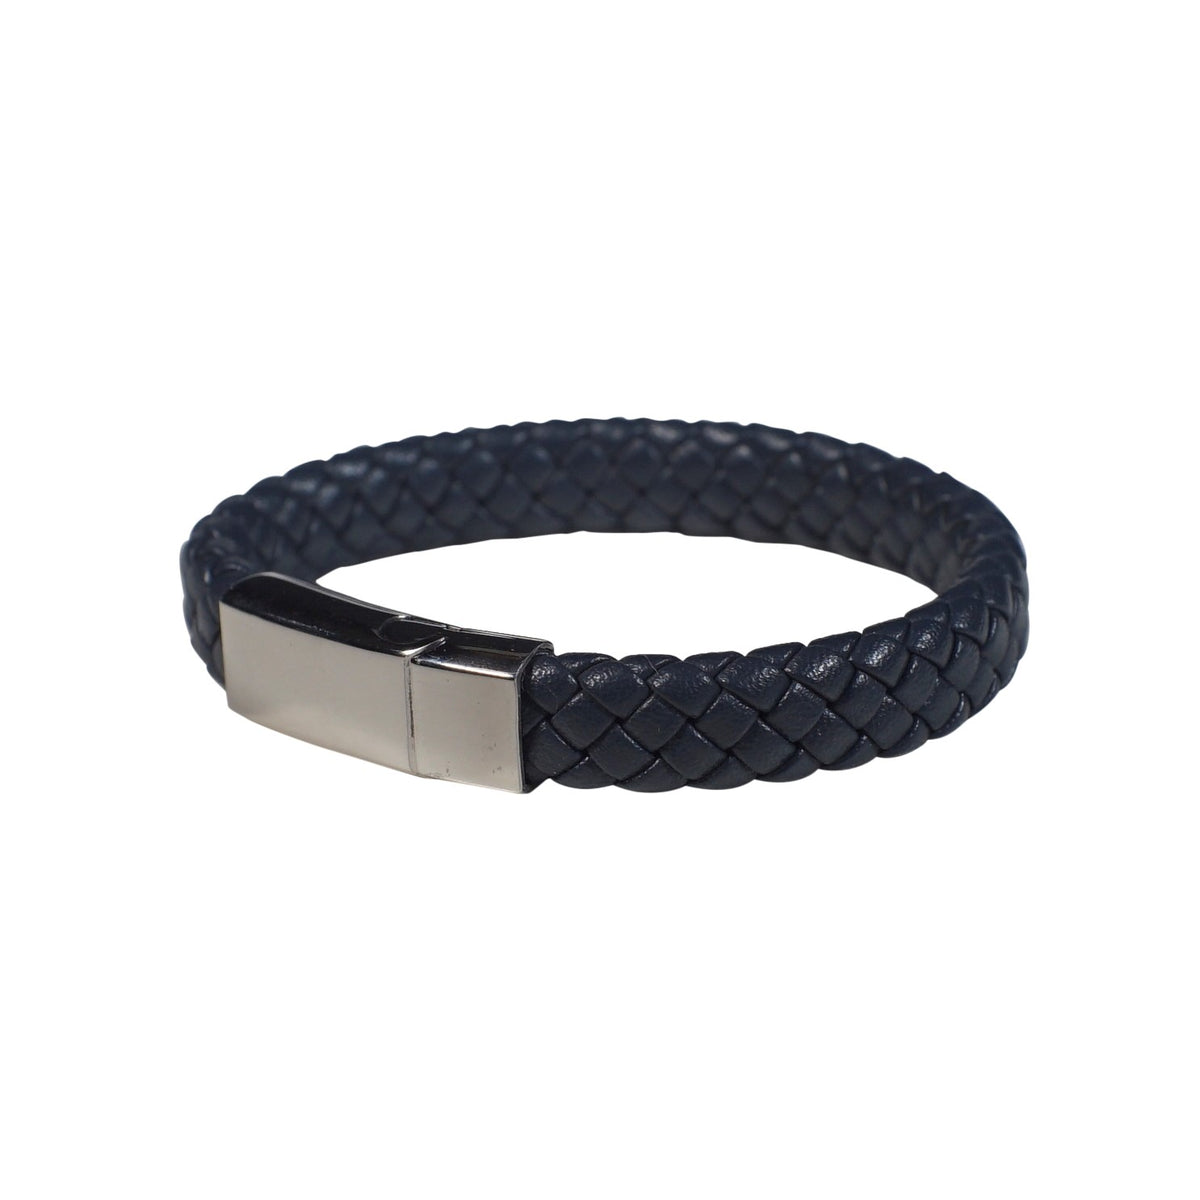 Chester Leather Bracelet in Navy (Size L) - Nomad Watch Works Malaysia